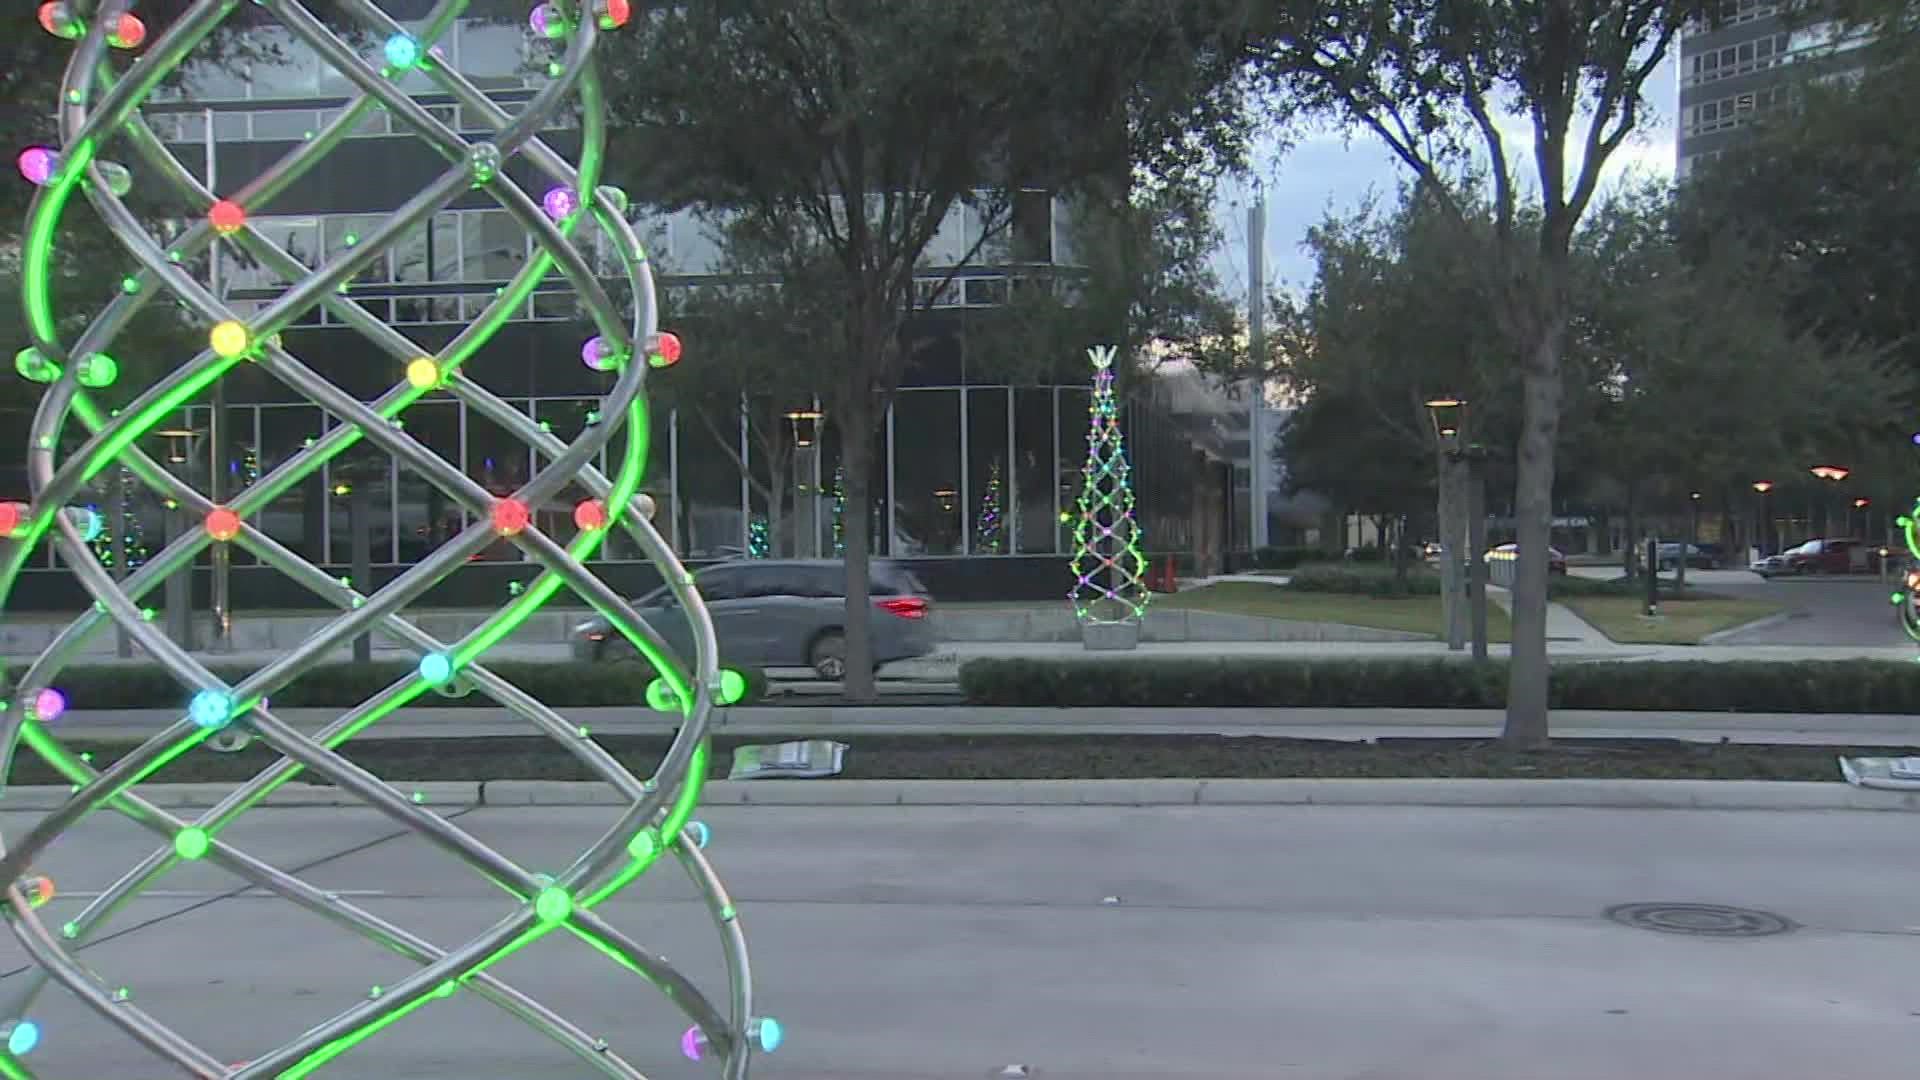 The "Uptown Holiday Light Show" is getting ready to switch on the lights for the Christmas holiday season.